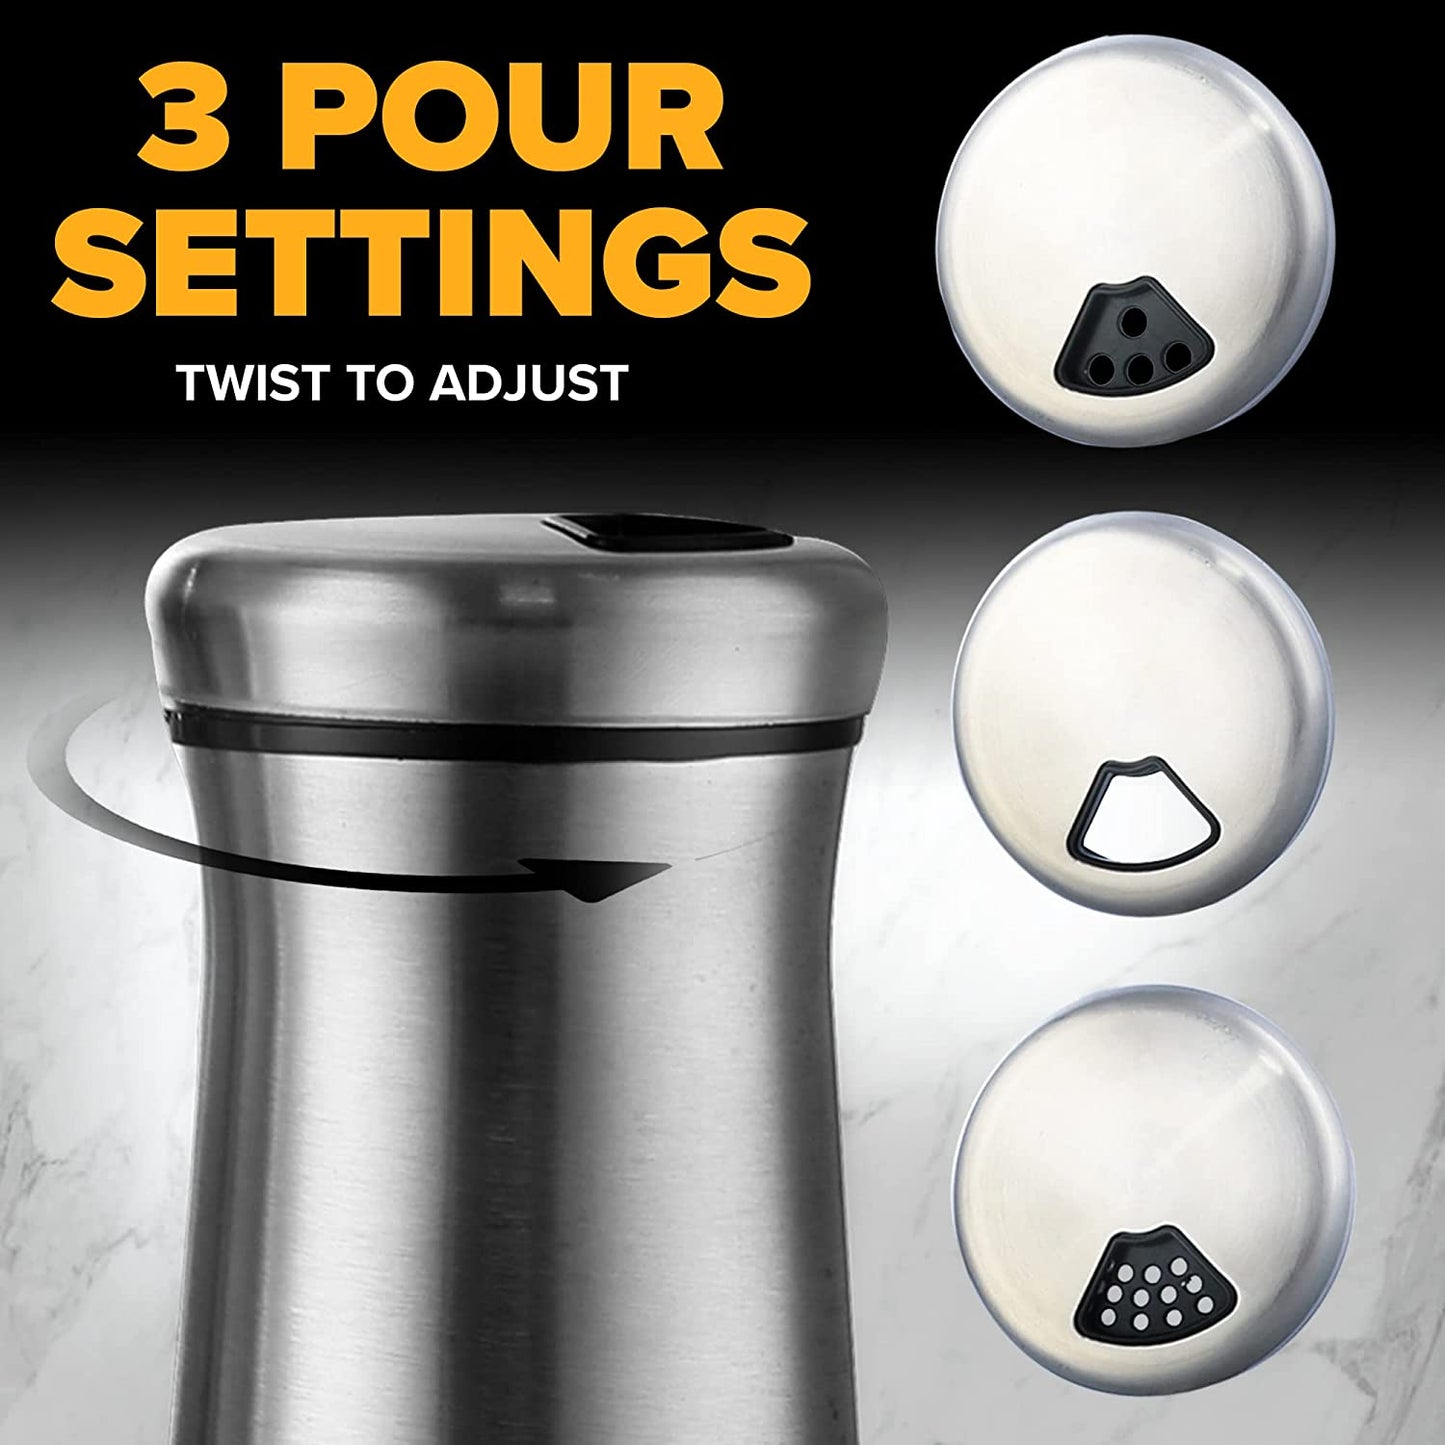 The Original Salt and Pepper Shakers set - Spice Dispenser with Adjustable Pour Holes - Stainless Steel & Glass - Set of 2 Bottles